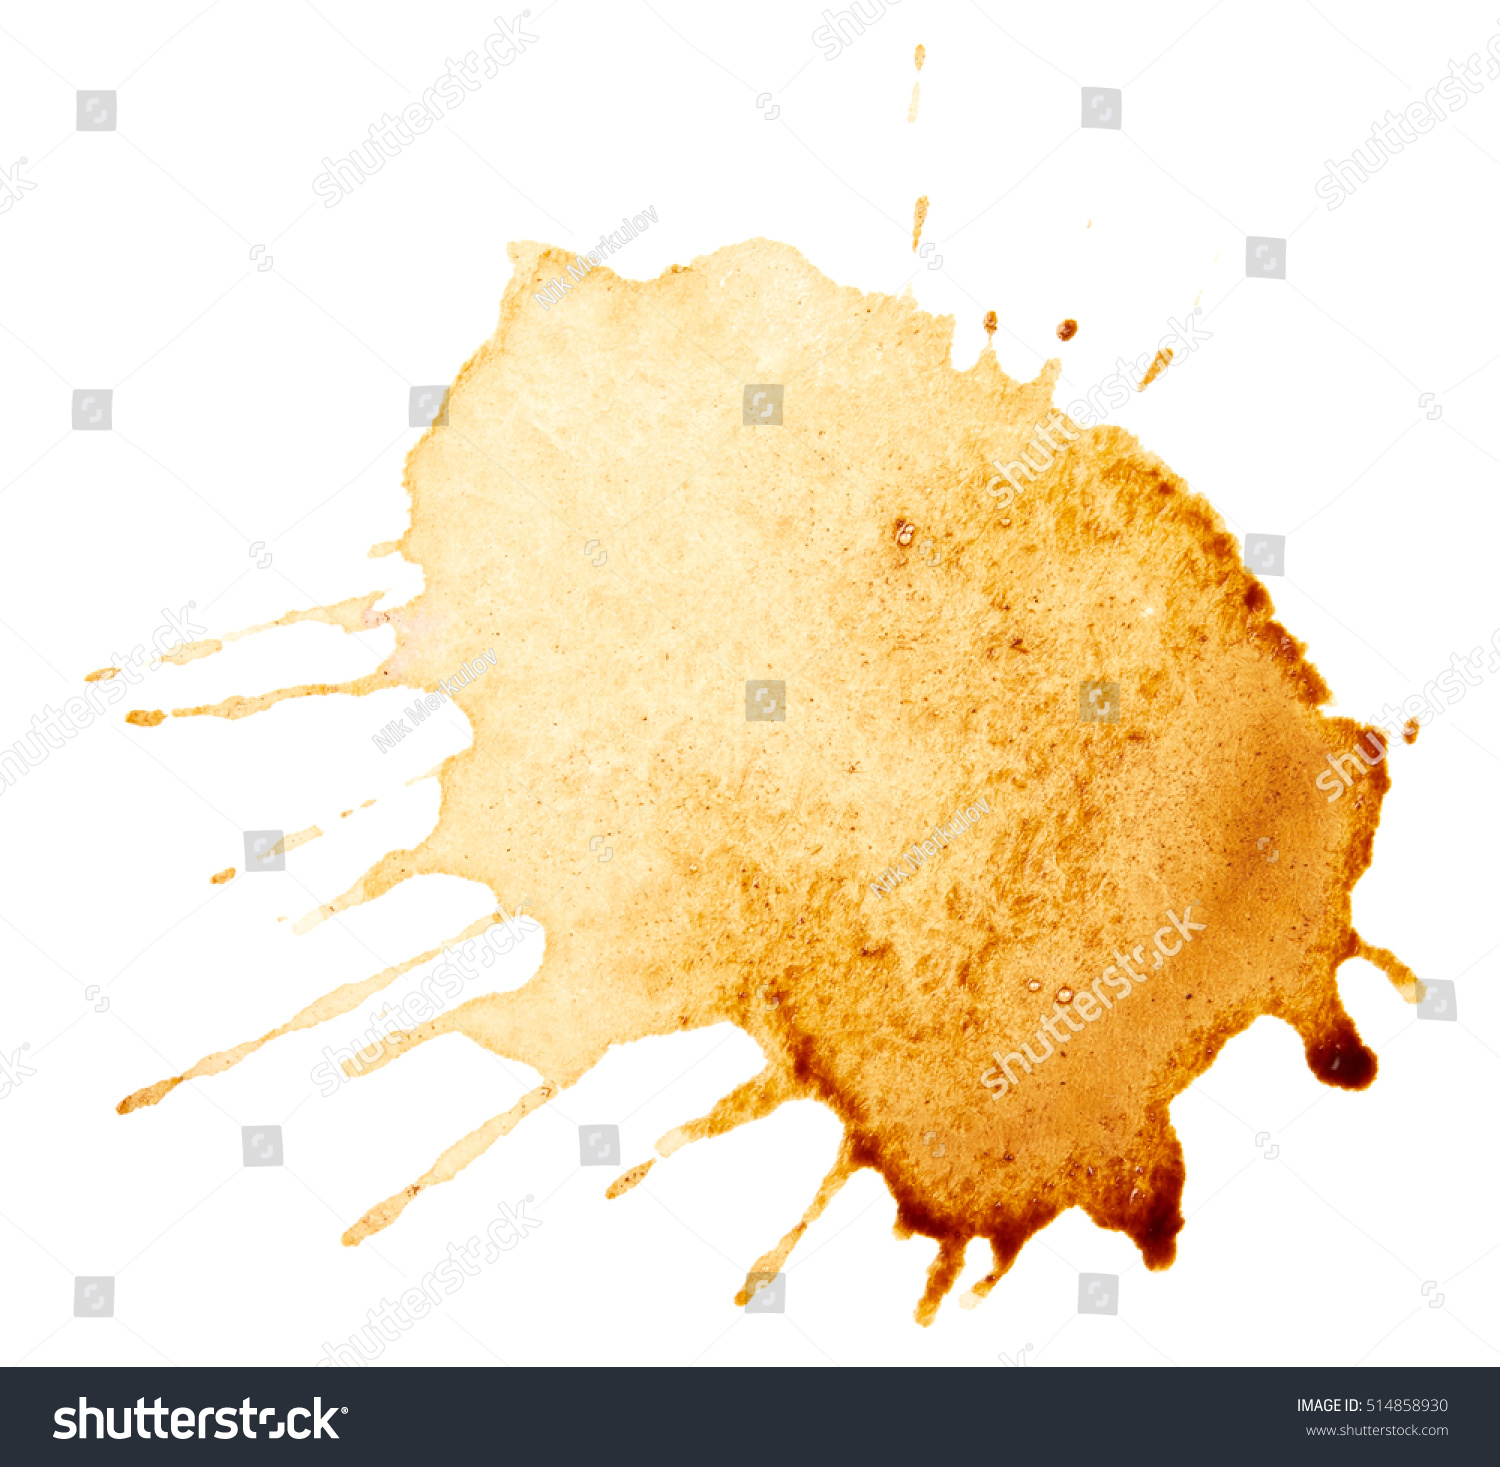 Coffee stains isolated on white background #514858930